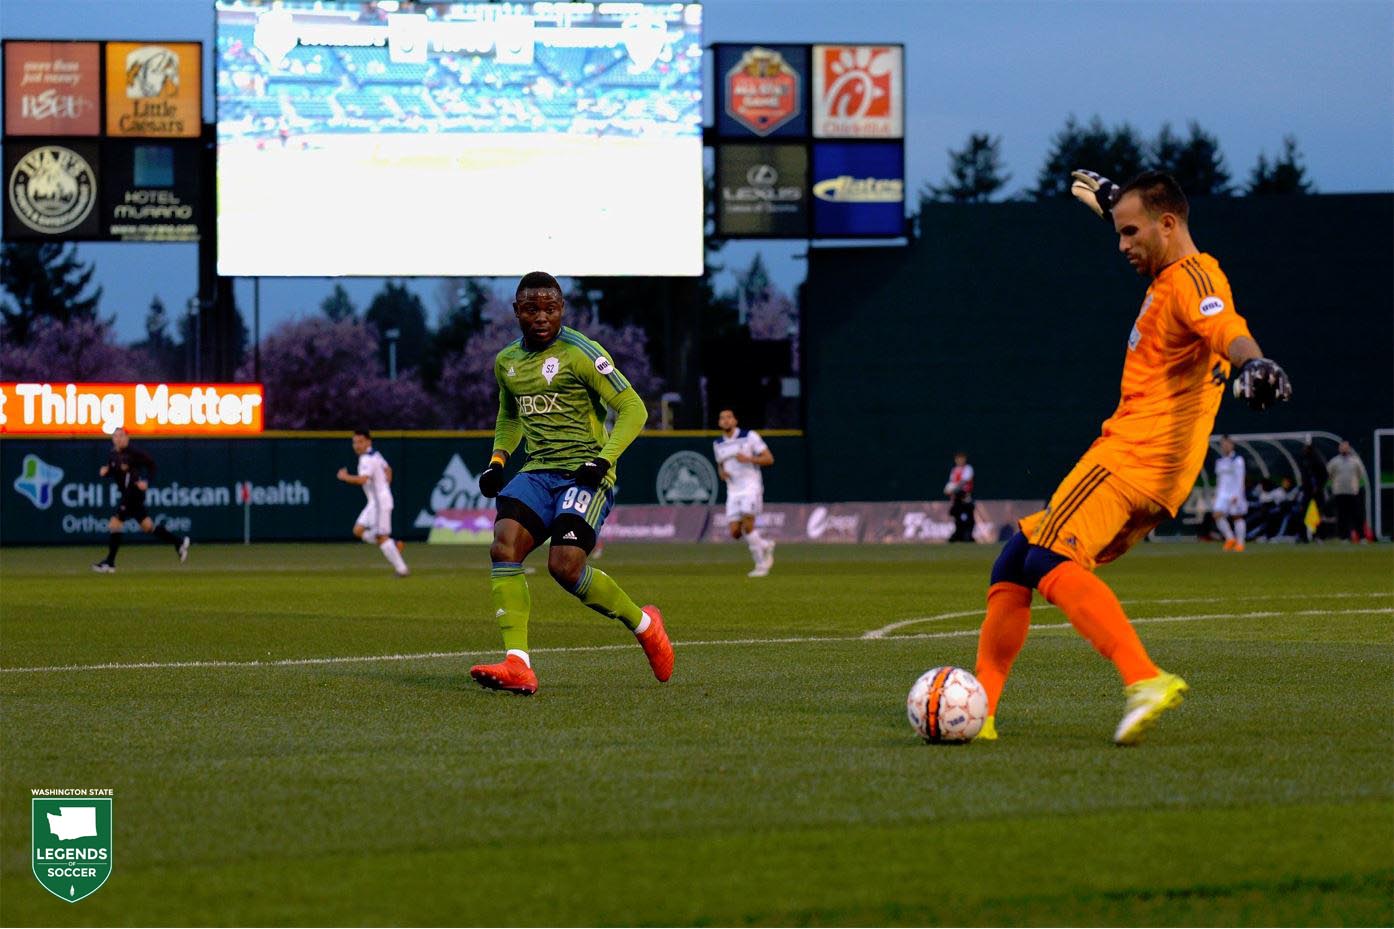 Felix Chenkam of Sounders 2, who made Cheney Stadium their home in 2018. (Courtesy Sounders FC)